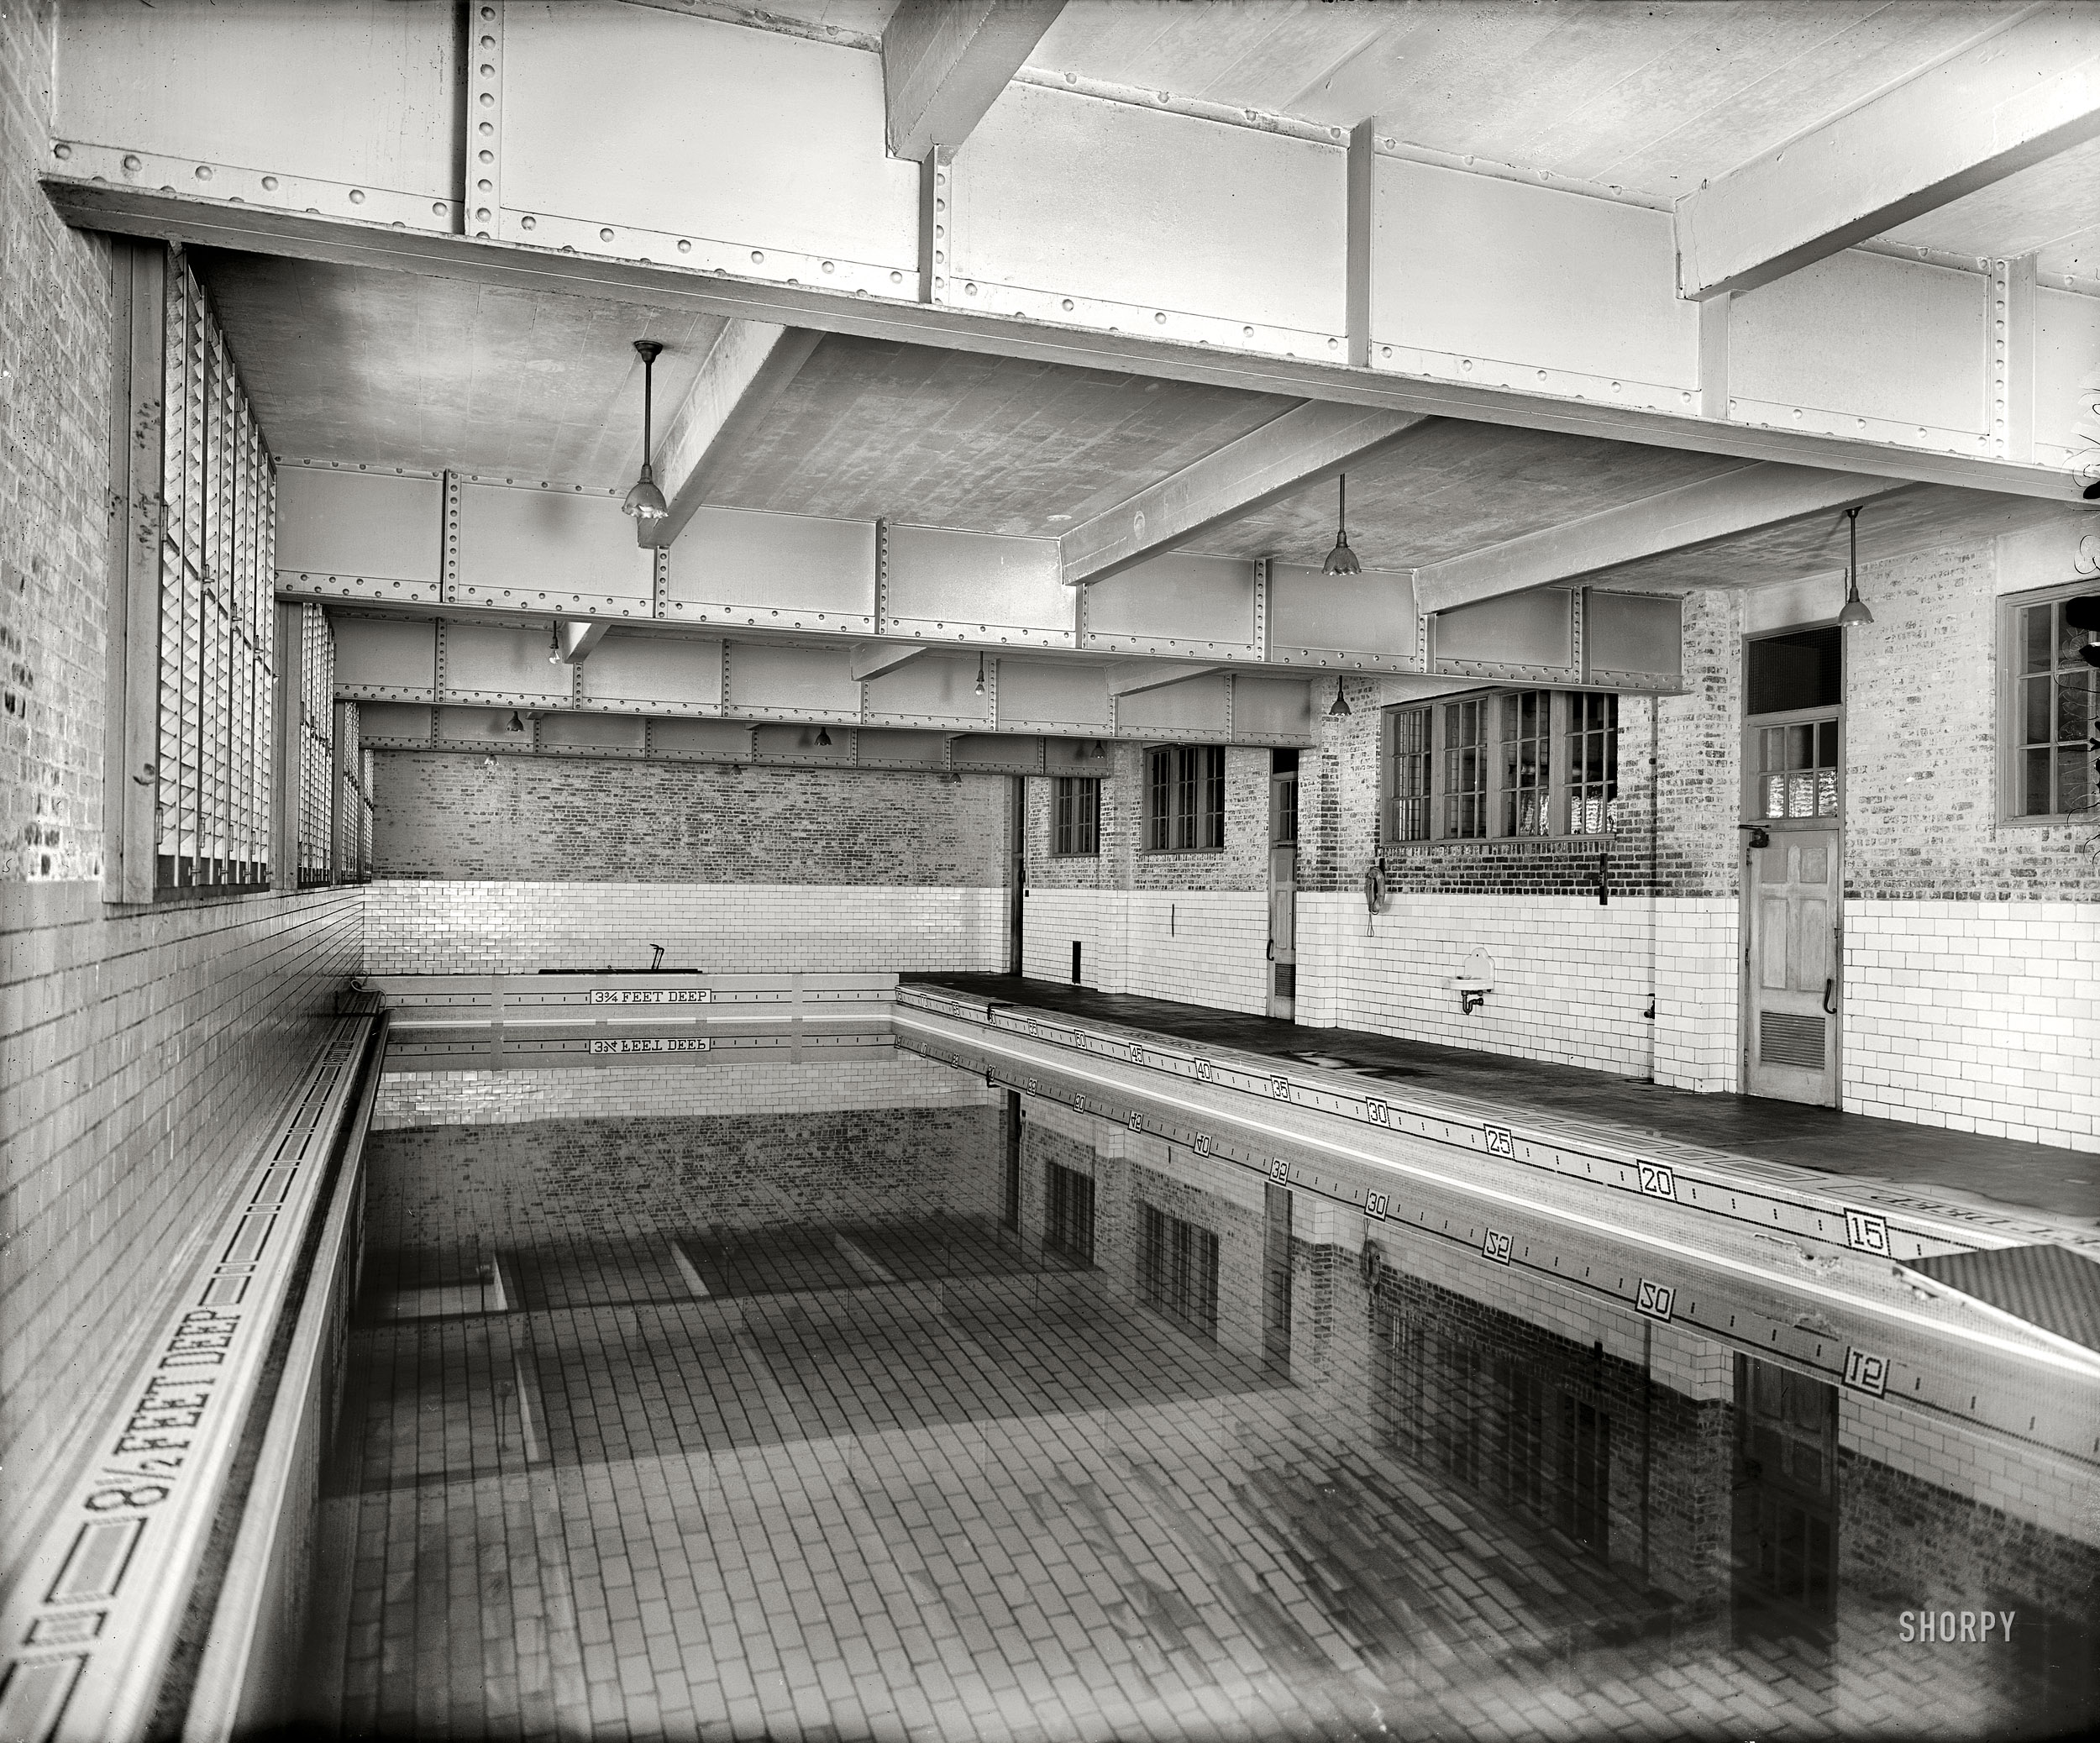 Washington, D.C., circa 1925. "Central High School swimming pool." National Photo Company Collection glass negative. View full size.